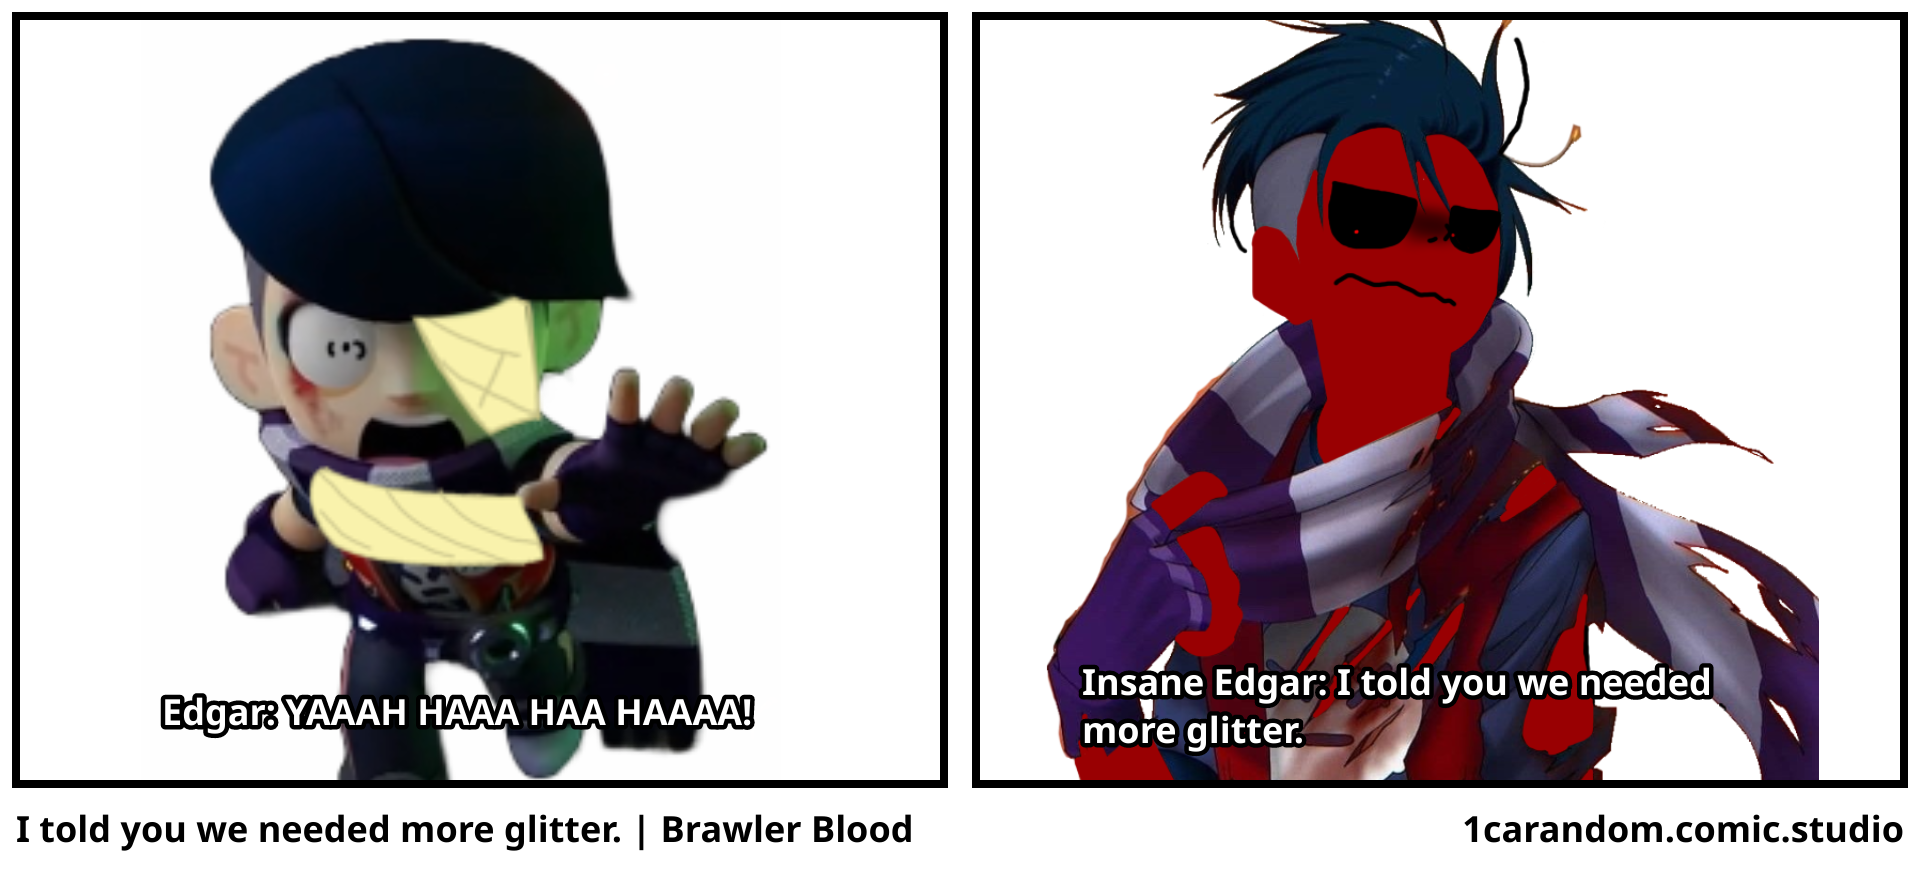 I told you we needed more glitter. | Brawler Blood